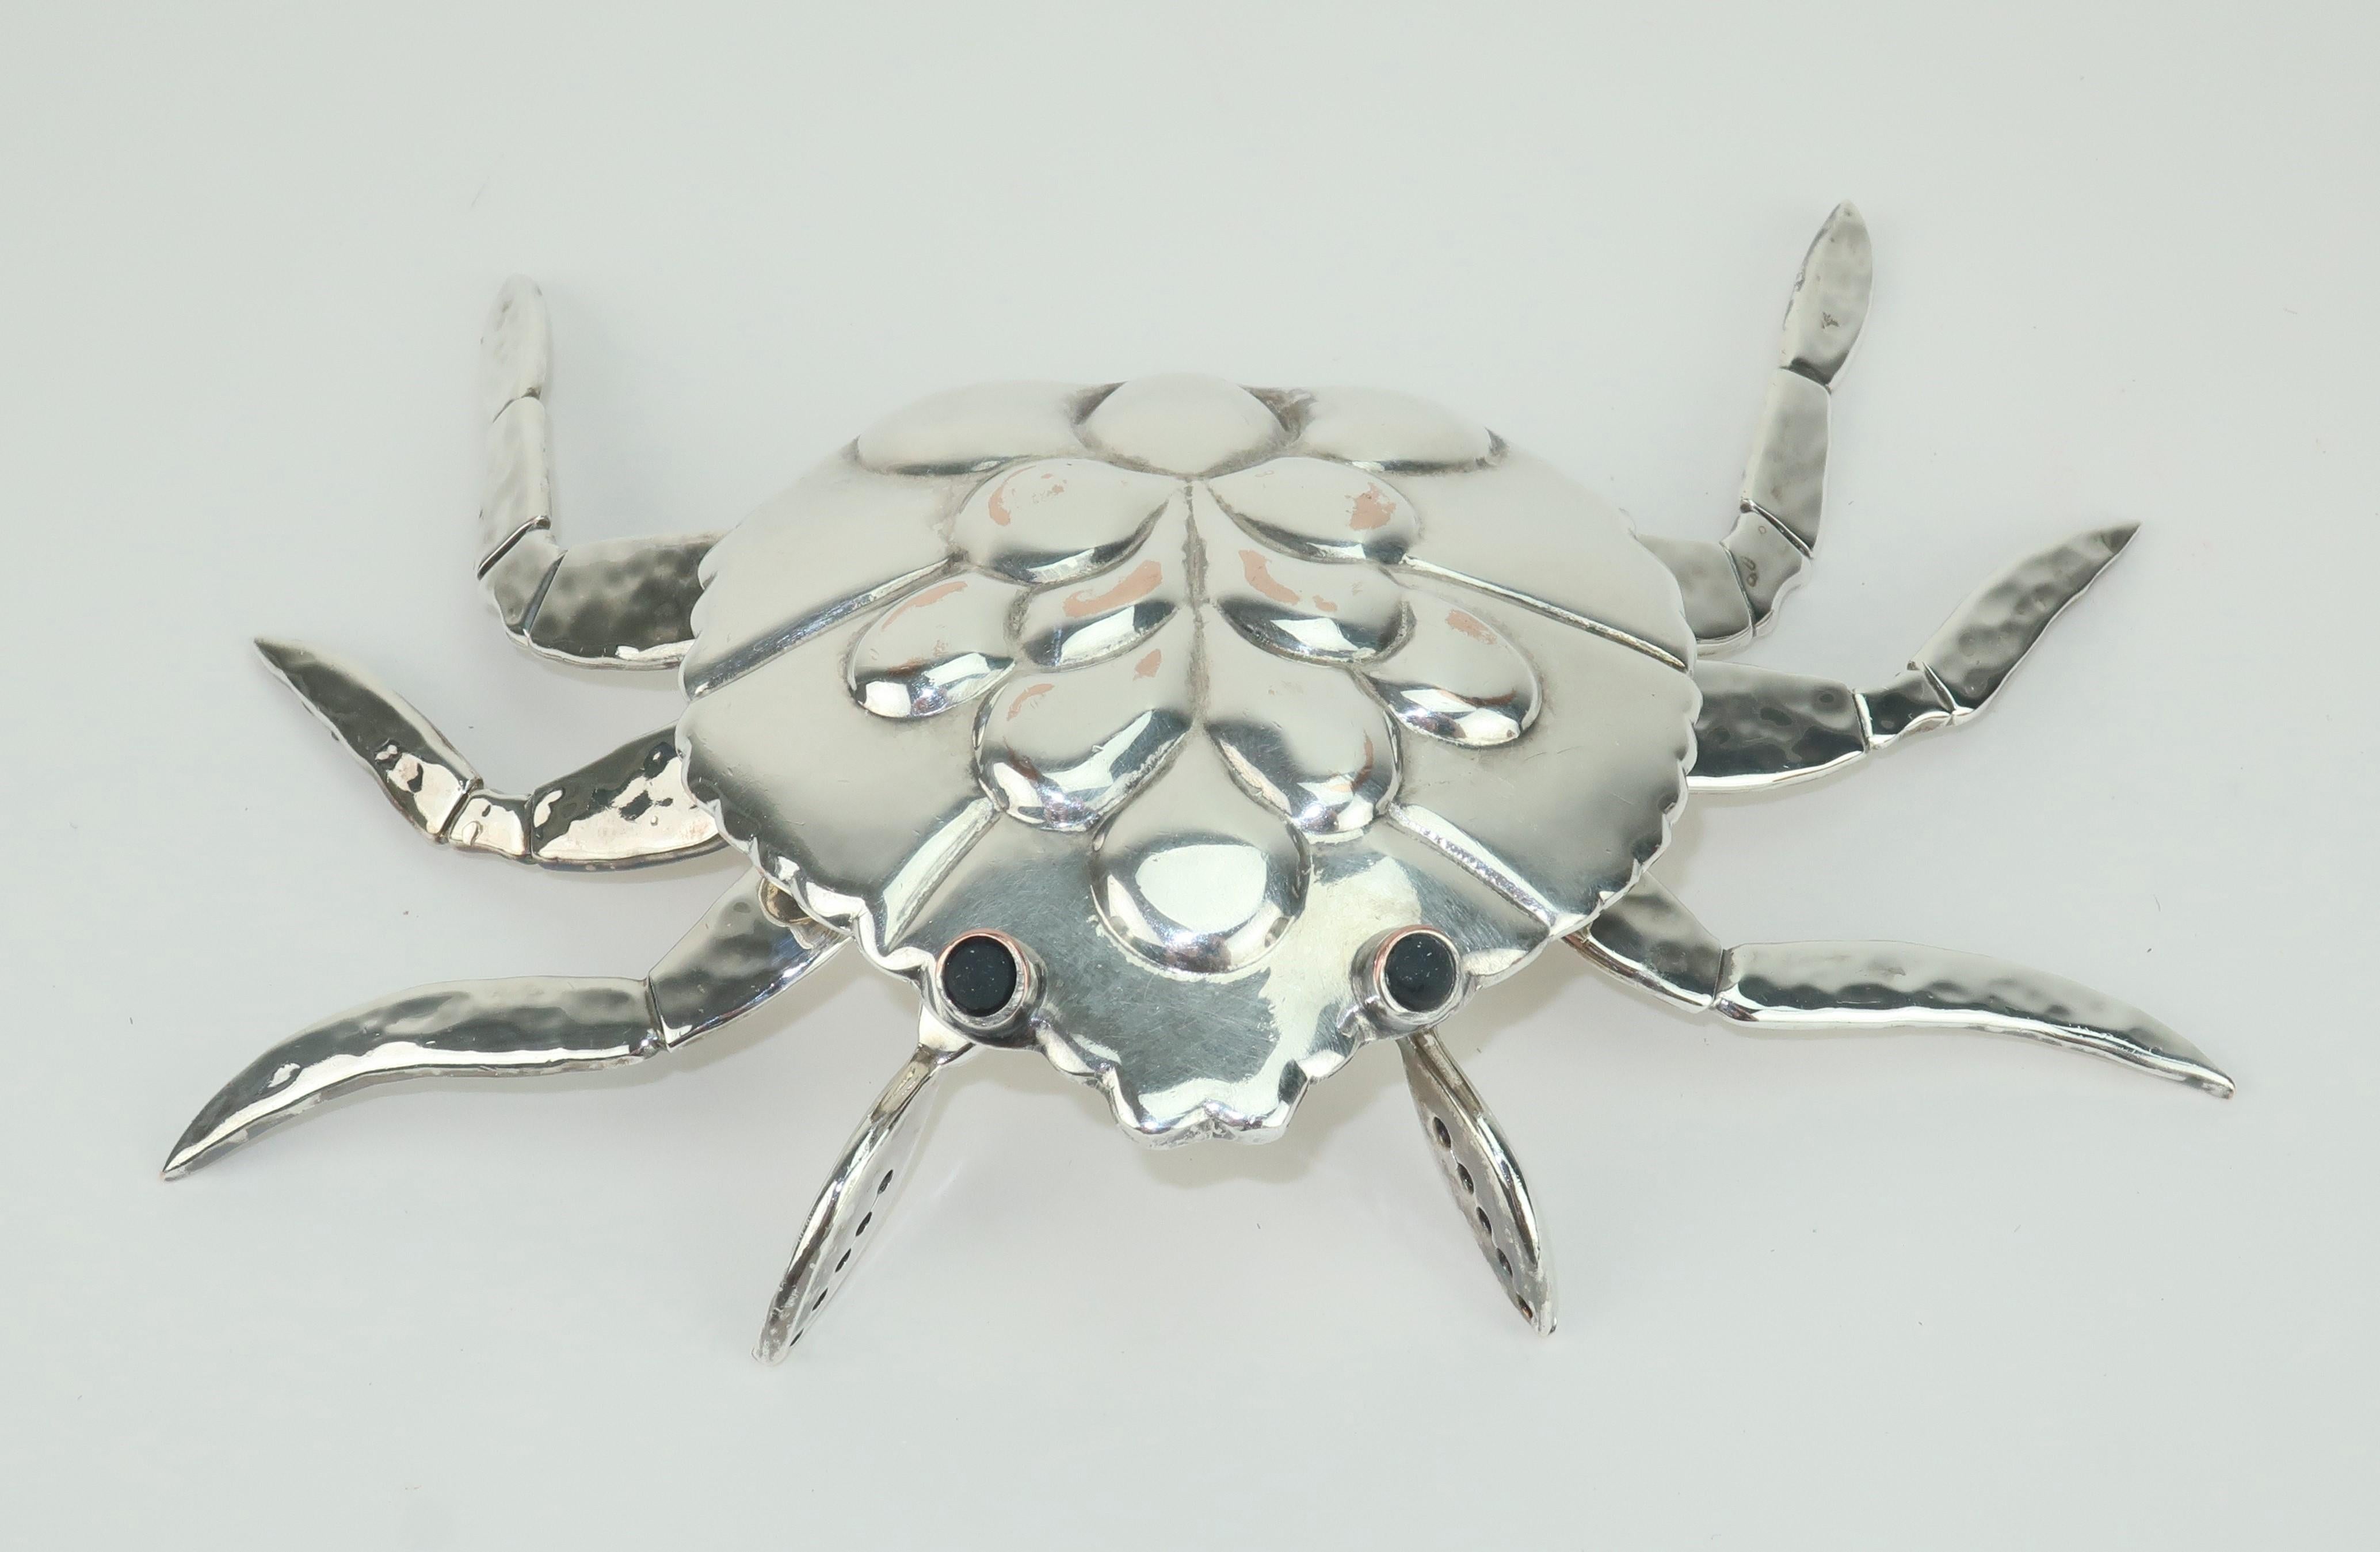 Silverplate crab bottle opener by Mexican designer, Emilia Castillo, who comes from a long line of Taxco artisans specializing in spectacular metal works. This charming crab is detailed with articulated limbs and ebony bulging eyes. As functional as